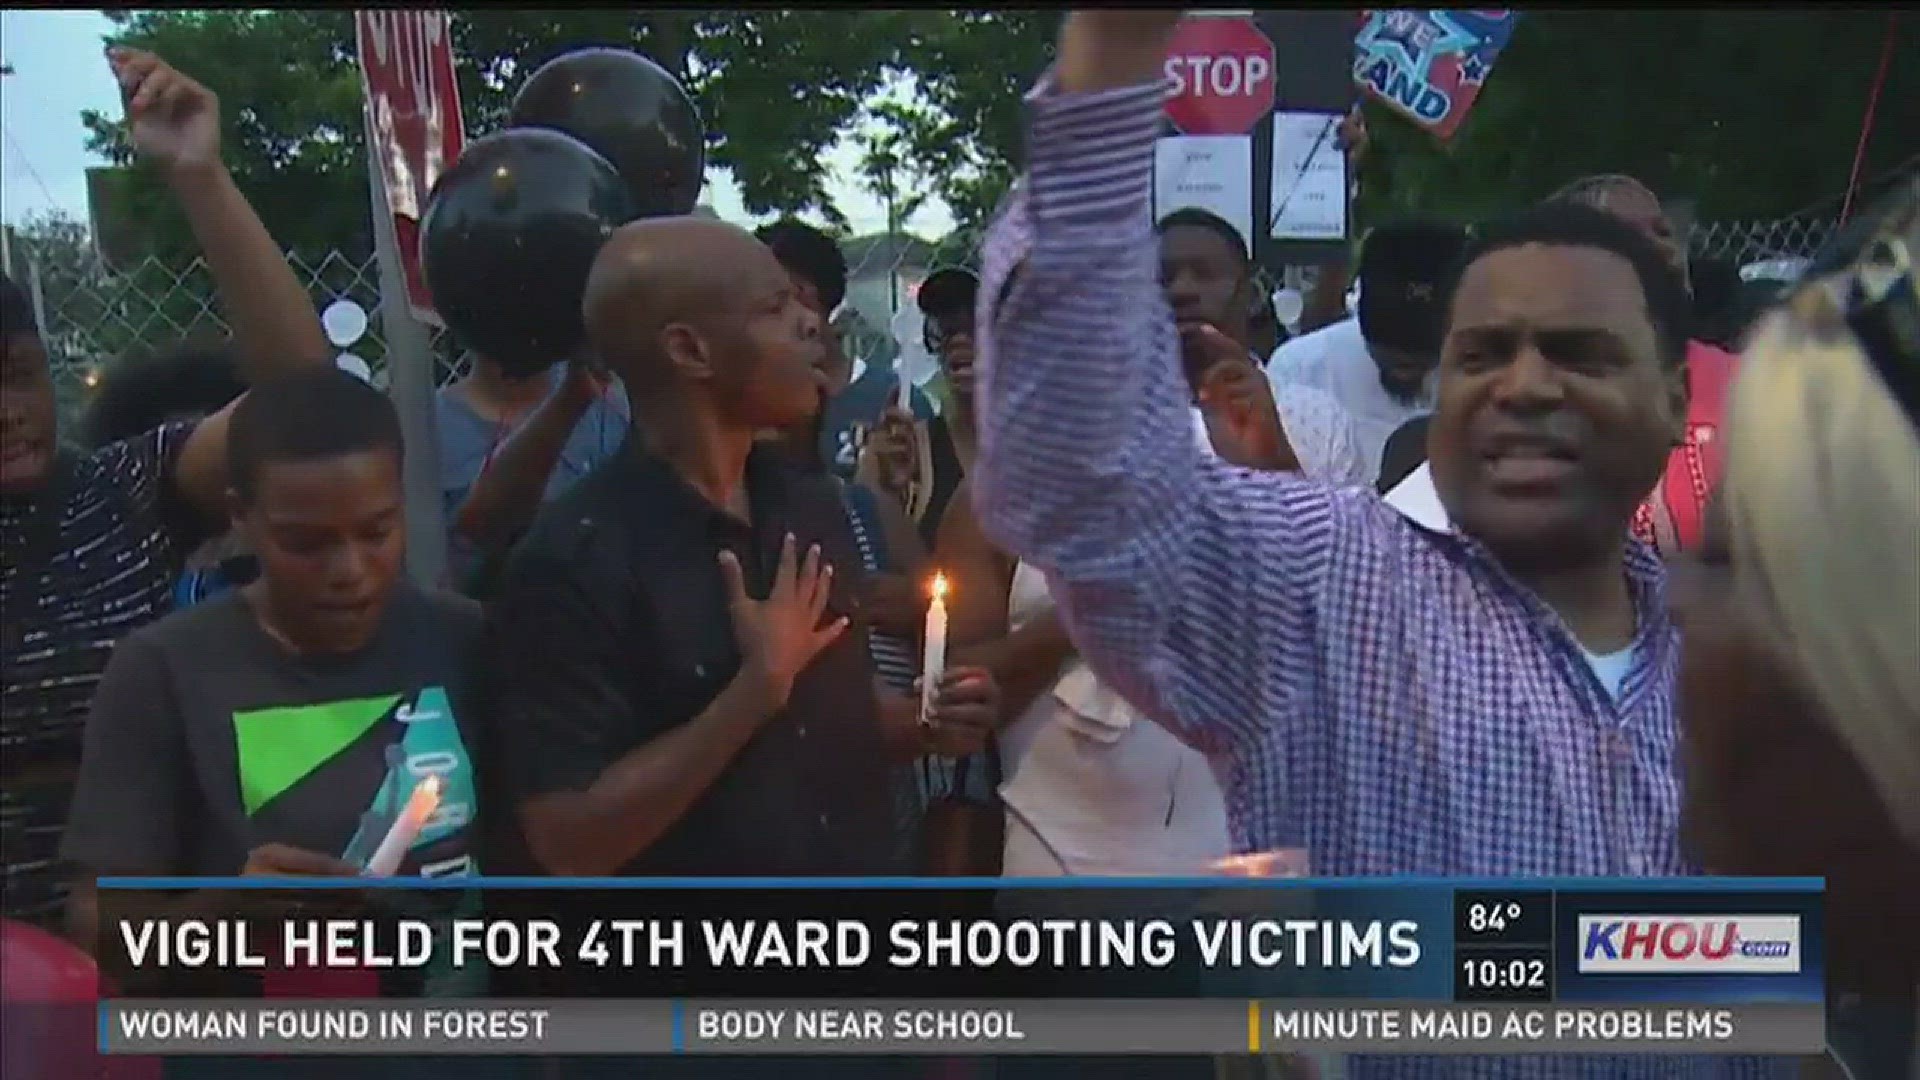 A vigil was held Tuesday night for three victims who were killed during a shooting in the Fourth Ward on the 4th of July.